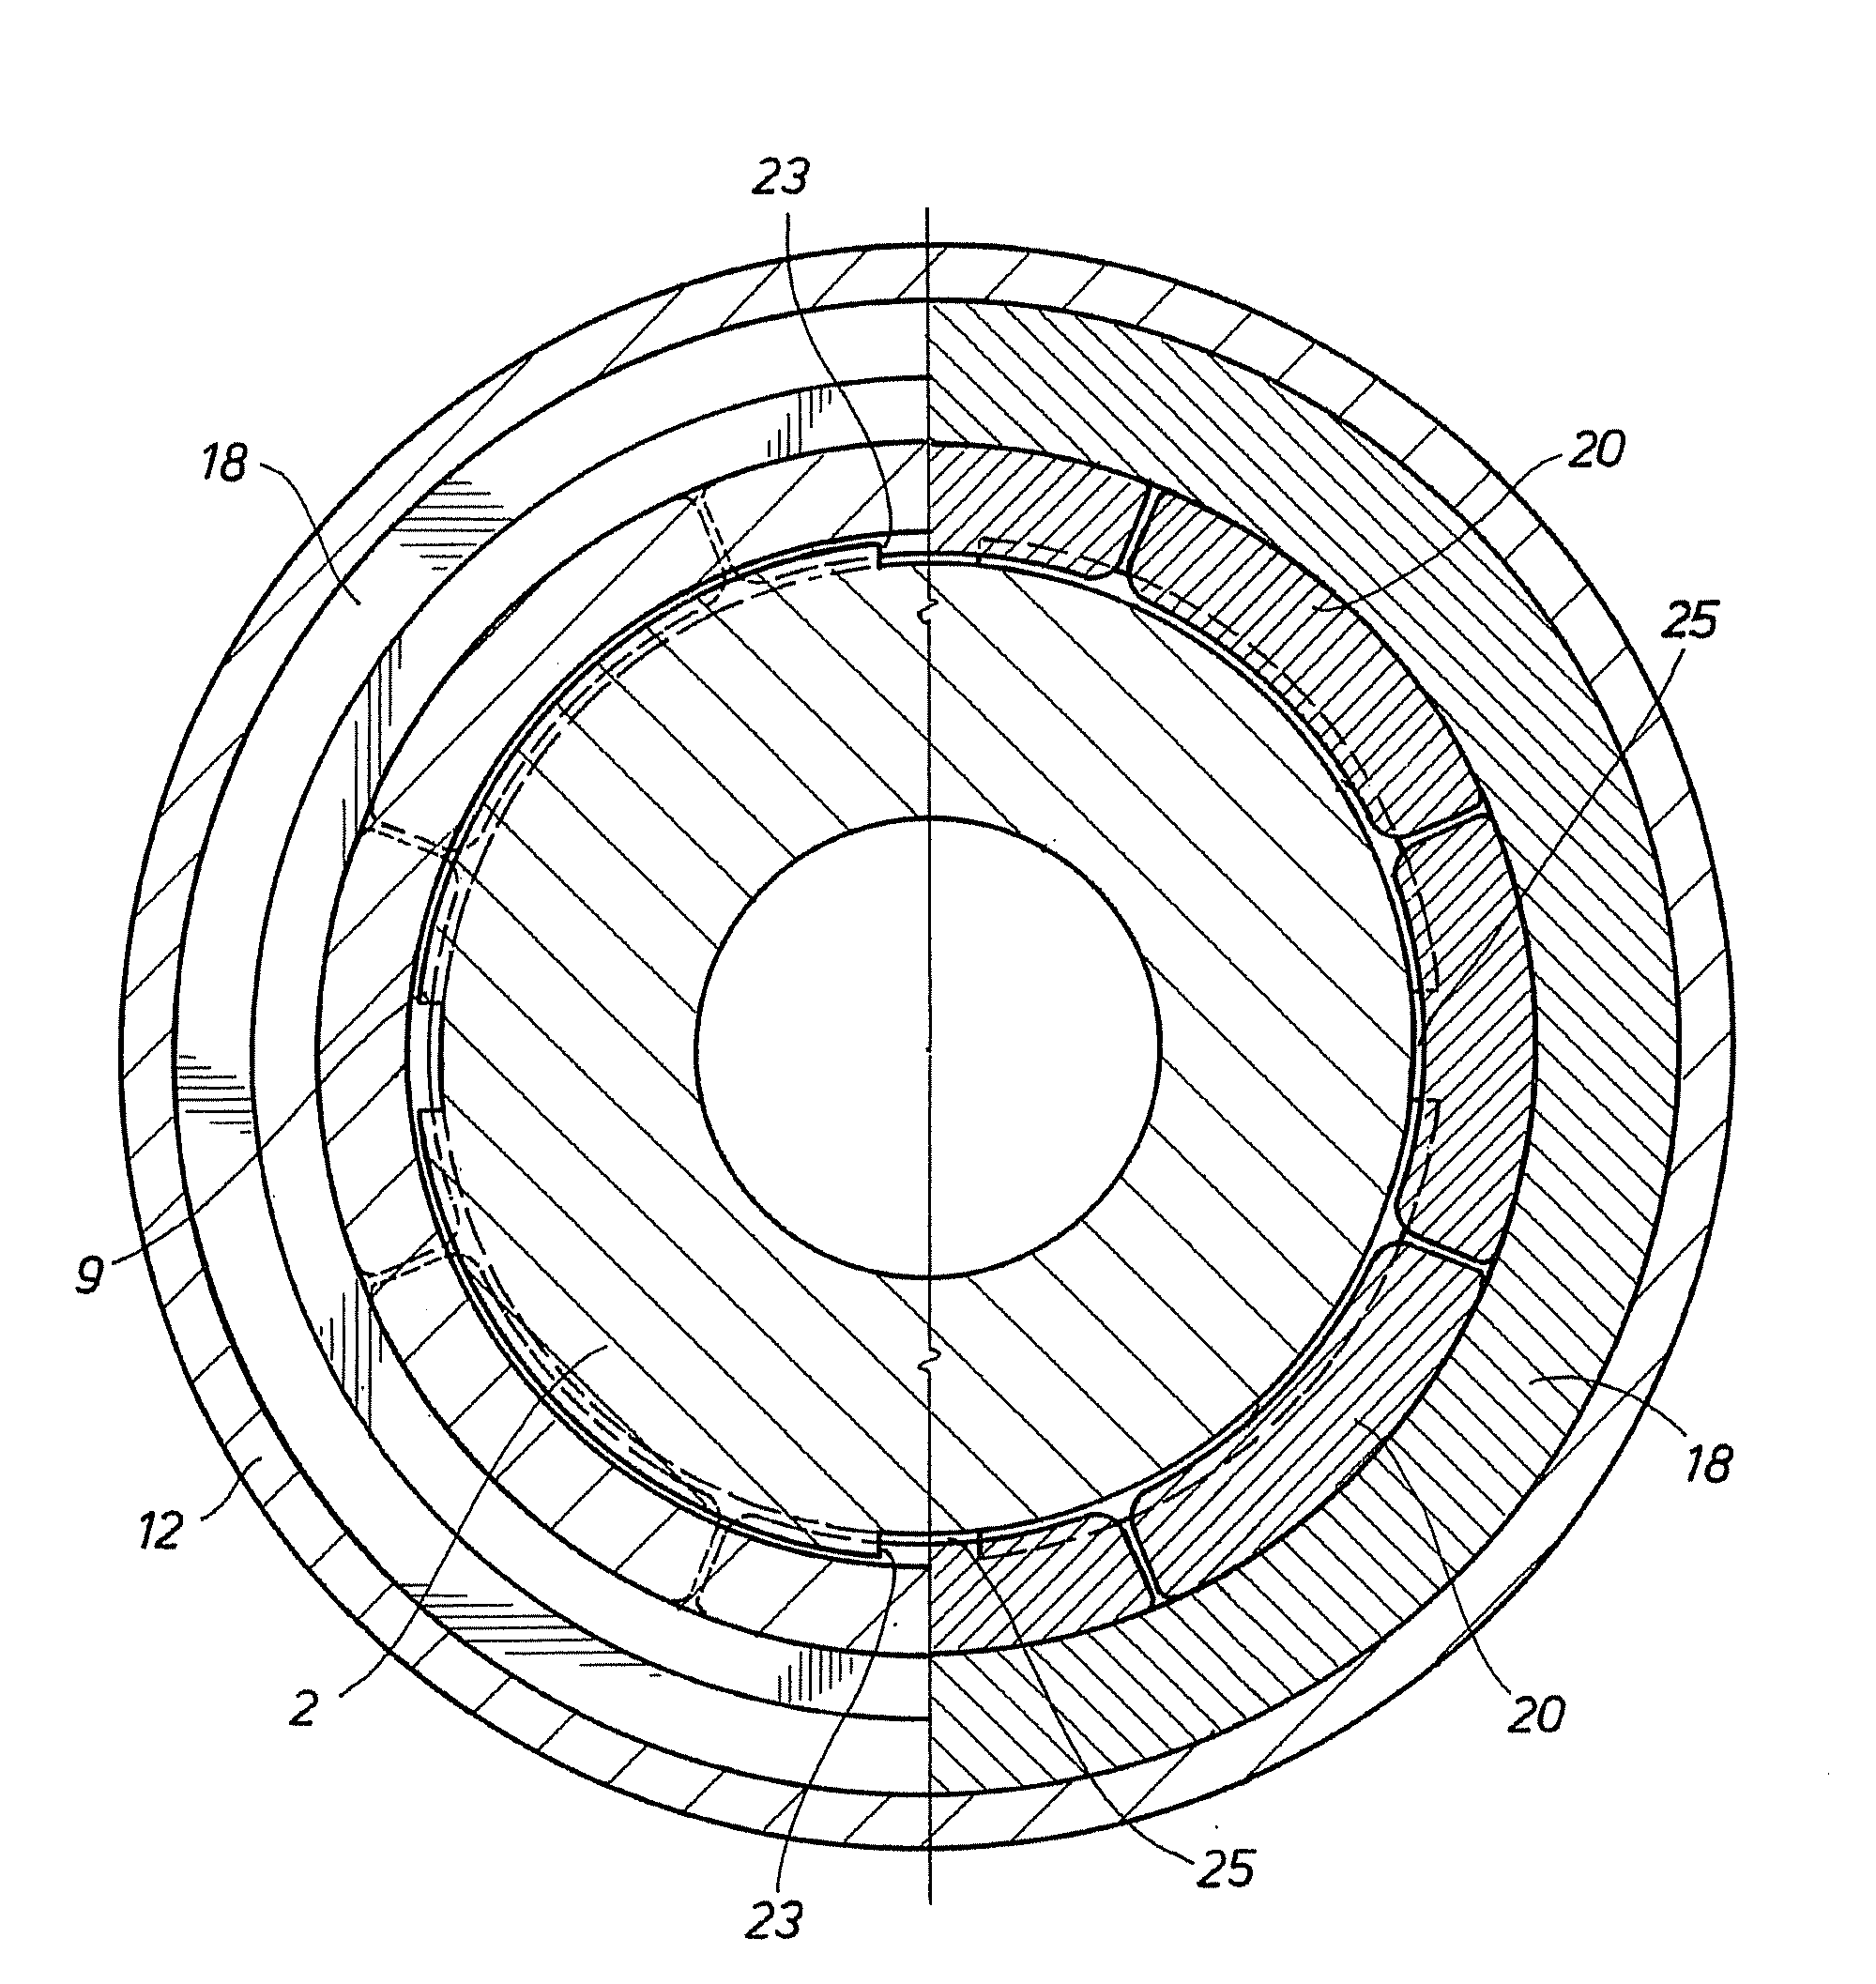 Subsea Internal Riser Rotating Control Device System and Method